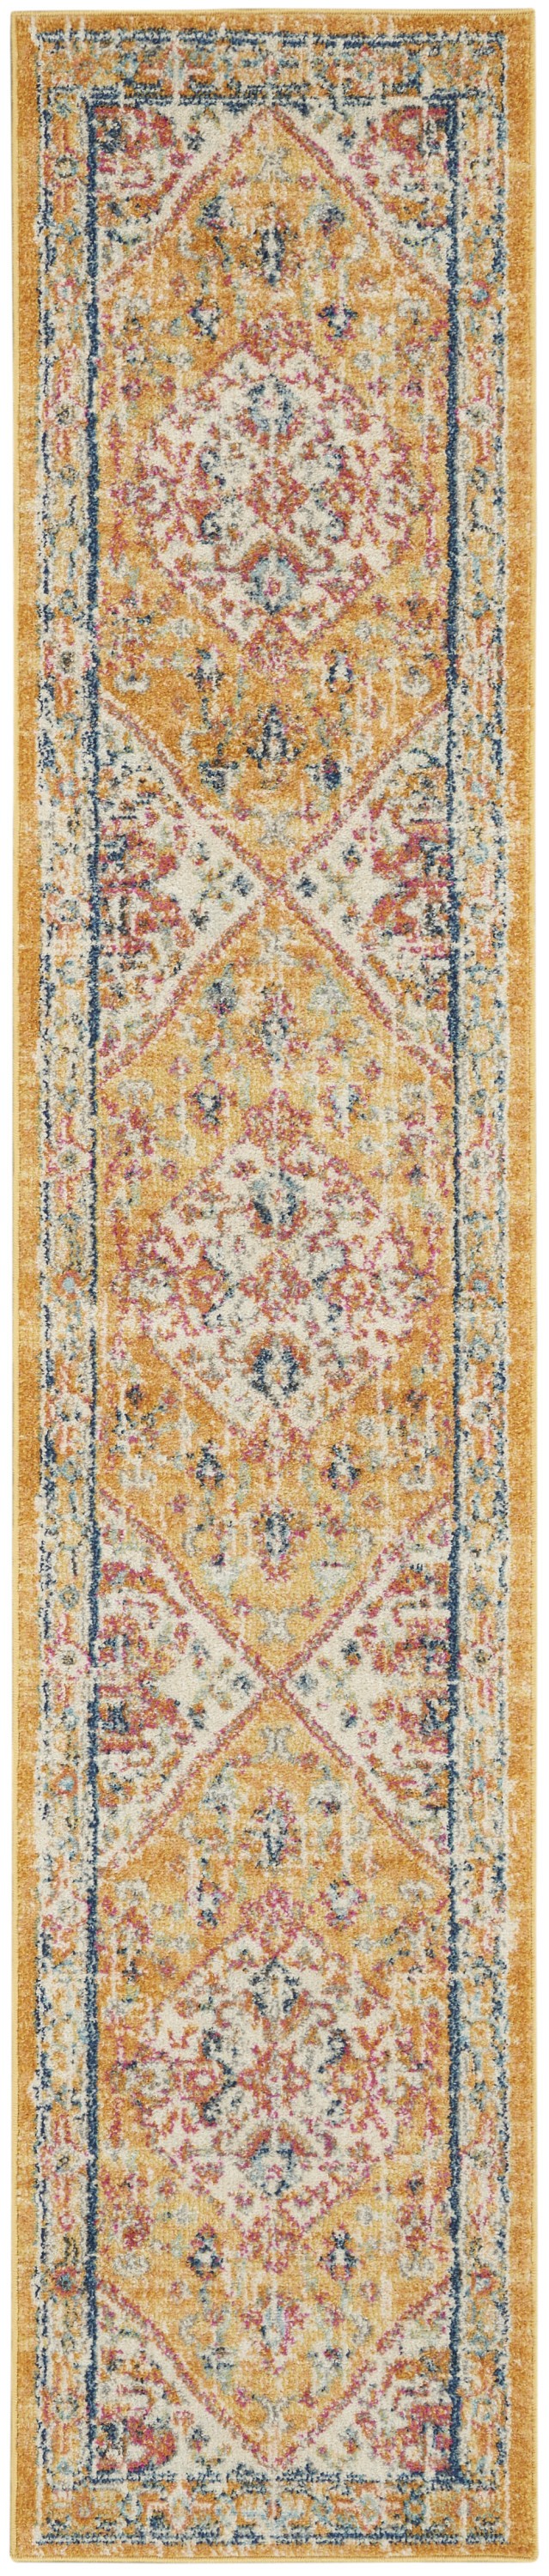 10' Yellow And Ivory Dhurrie Runner Rug-385560-1